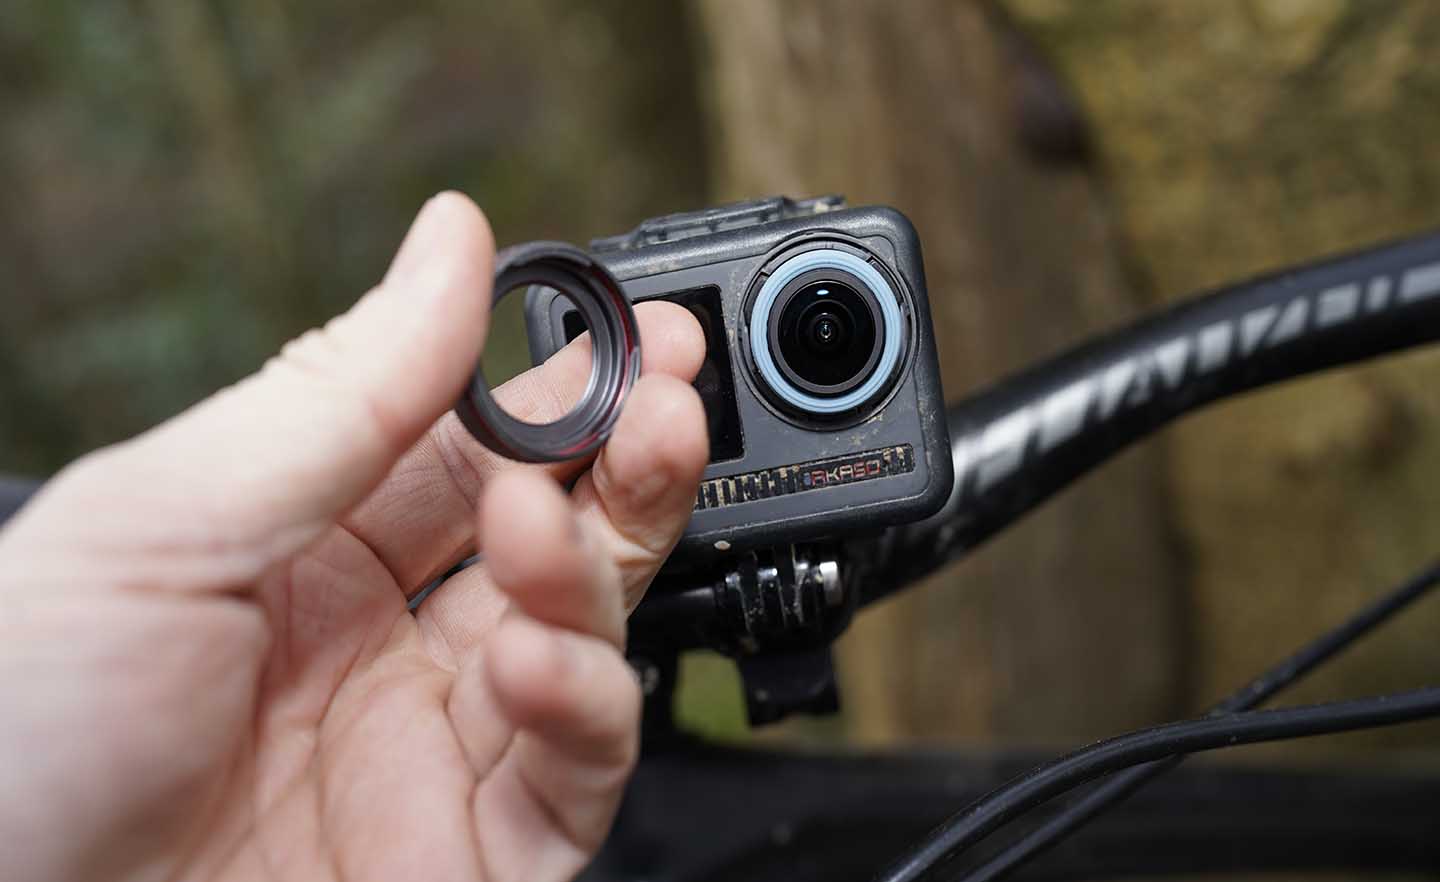 AKASO Brave 8 action camera review - great specs but some flaws - The  Gadgeteer